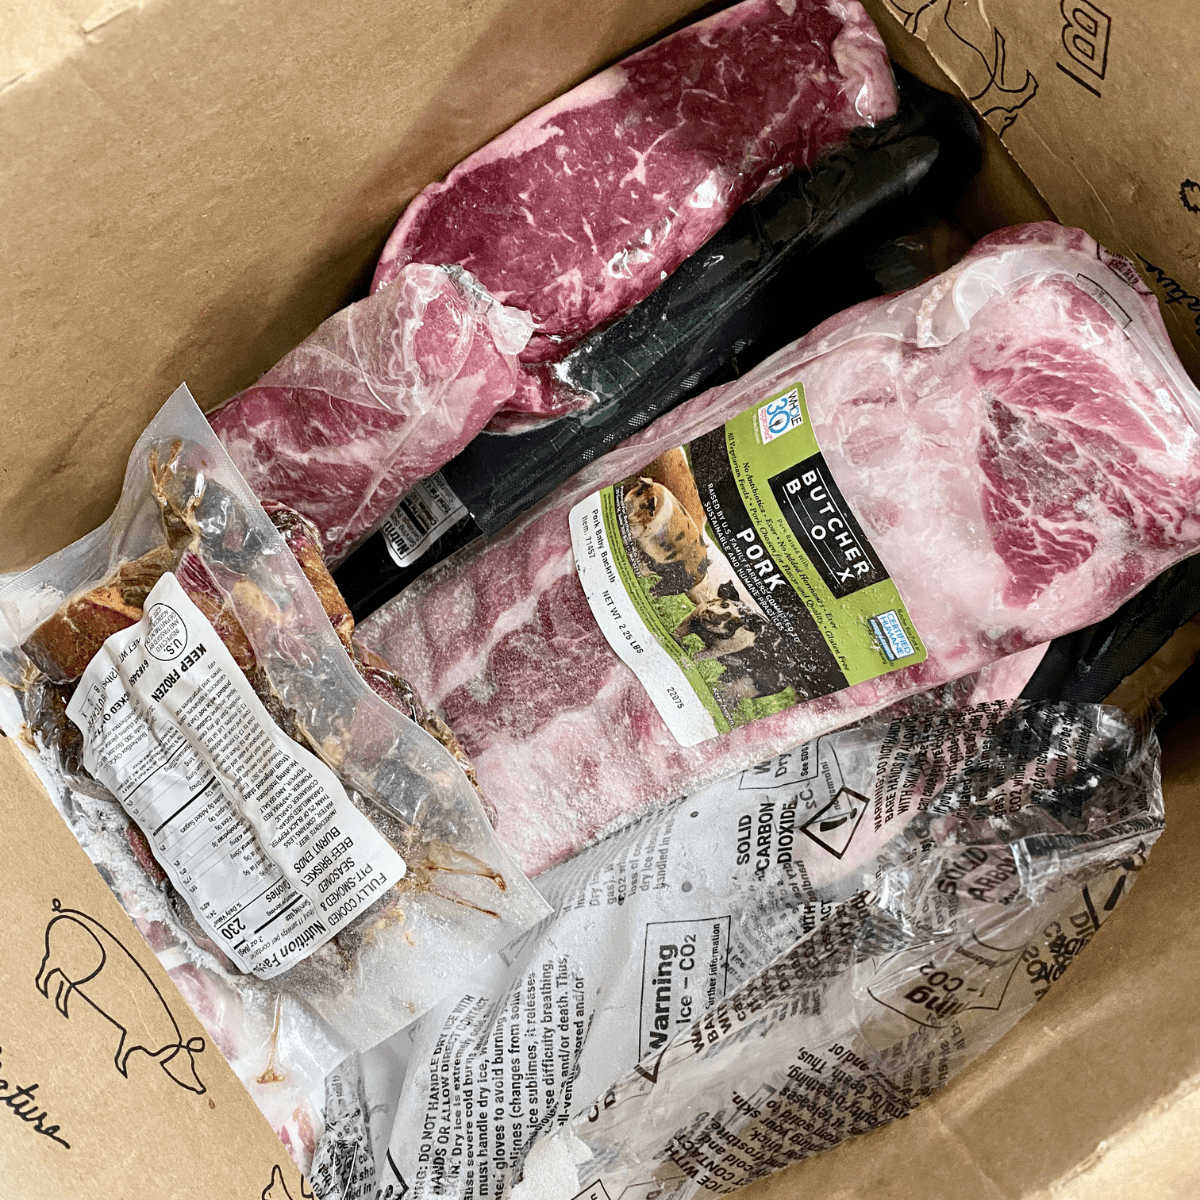 Inside the ButcherBox delivery box with frozen sealed packages of meat.